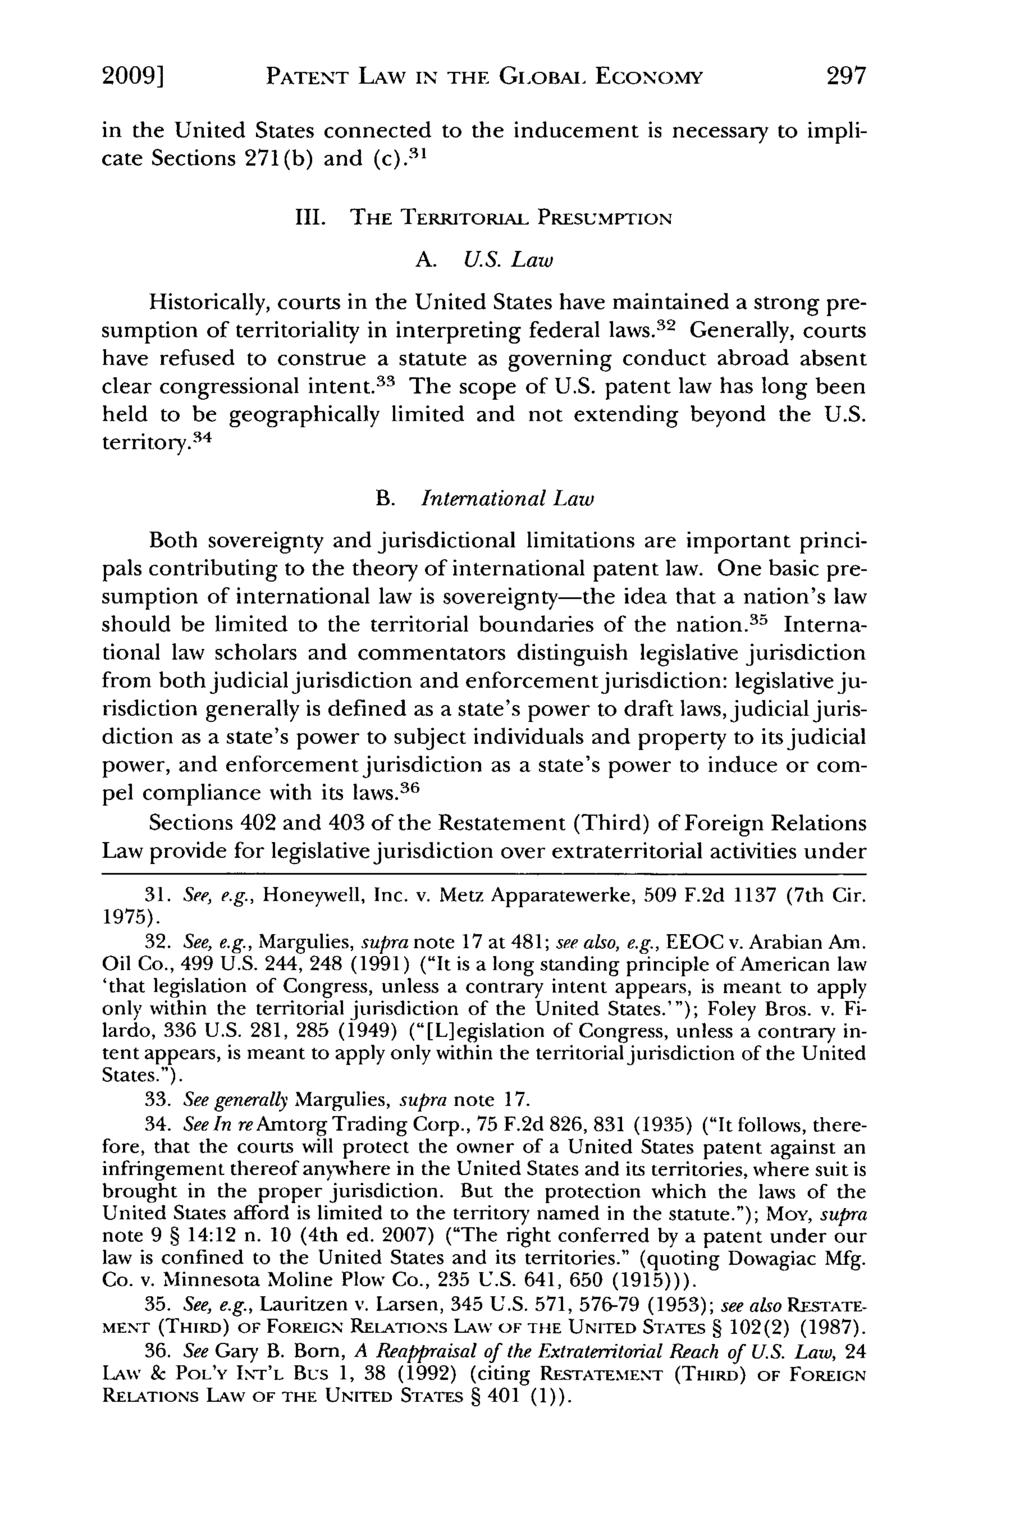 2009] Keyhani: Patent Law in the Global Economy: A Modest Proposal for U.S.